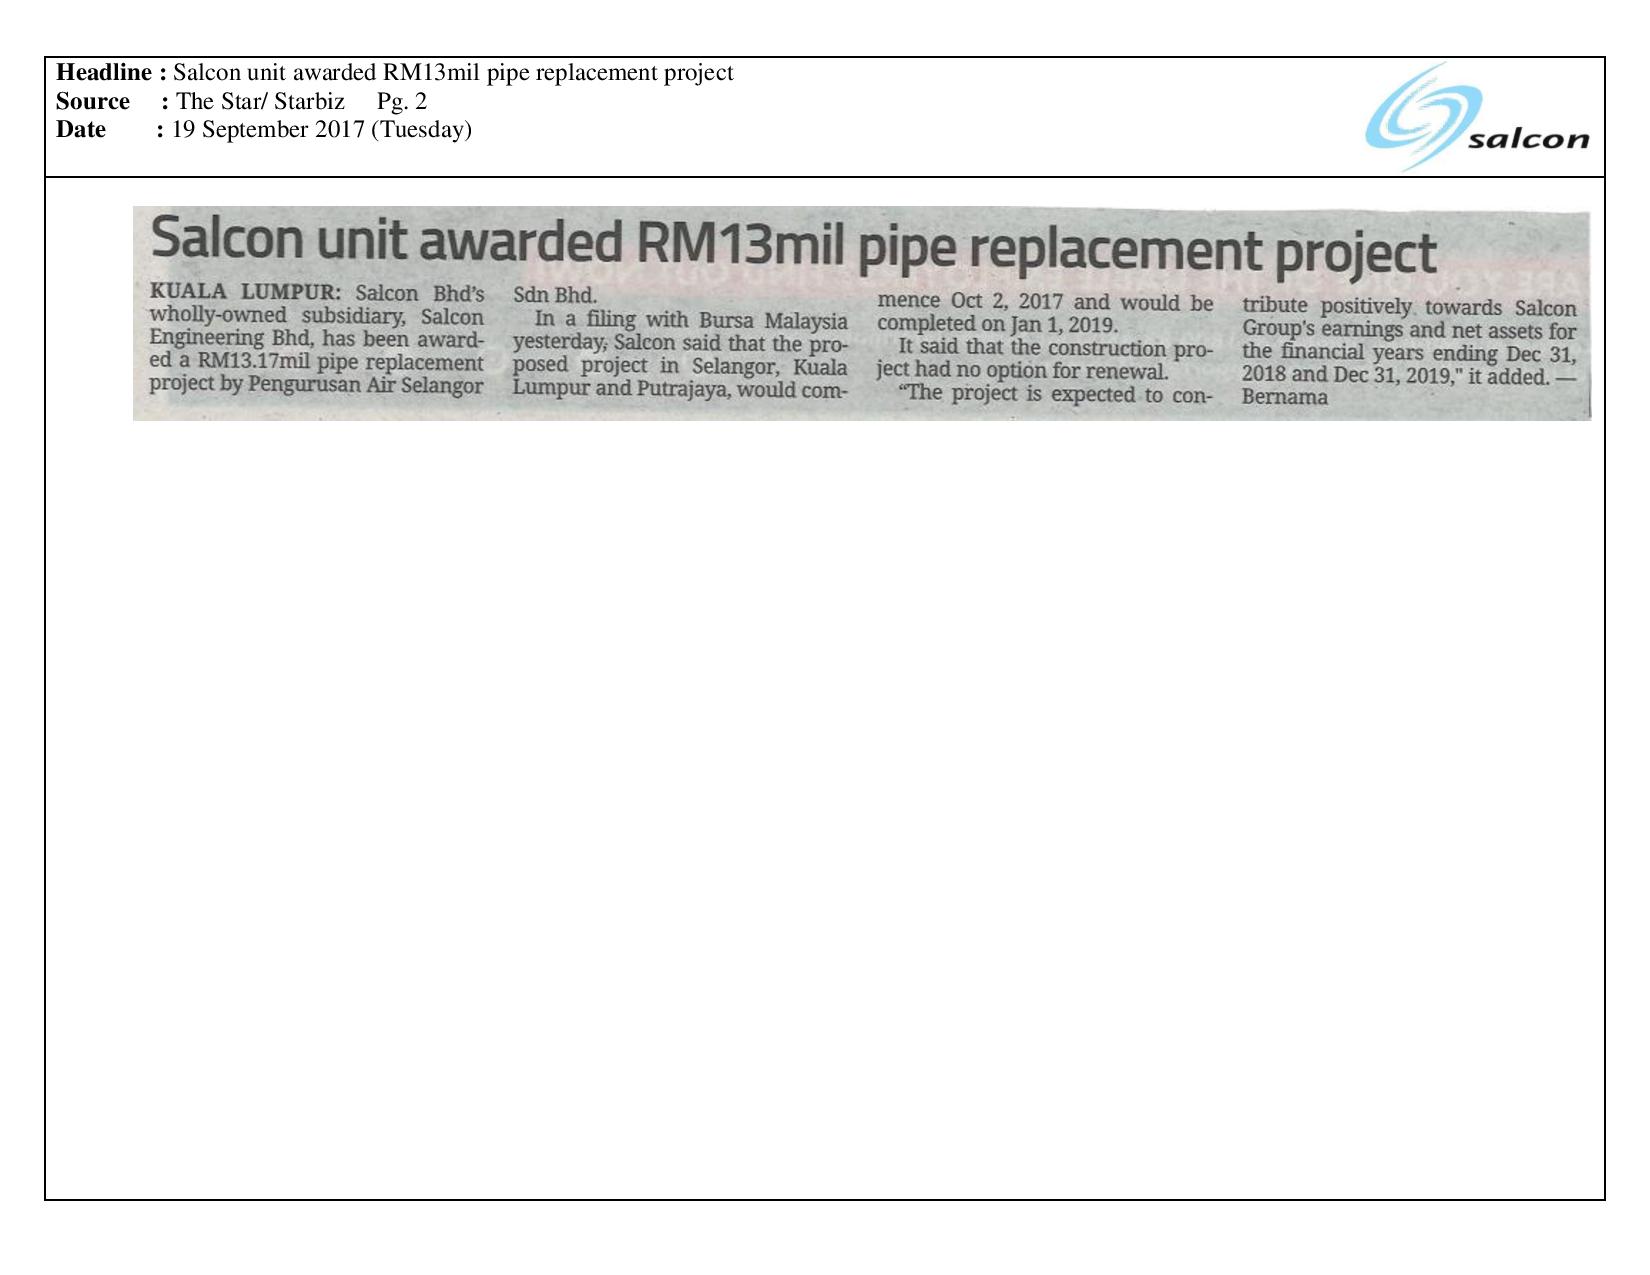 Salcon unit awarded RM13mil pipe replacement project